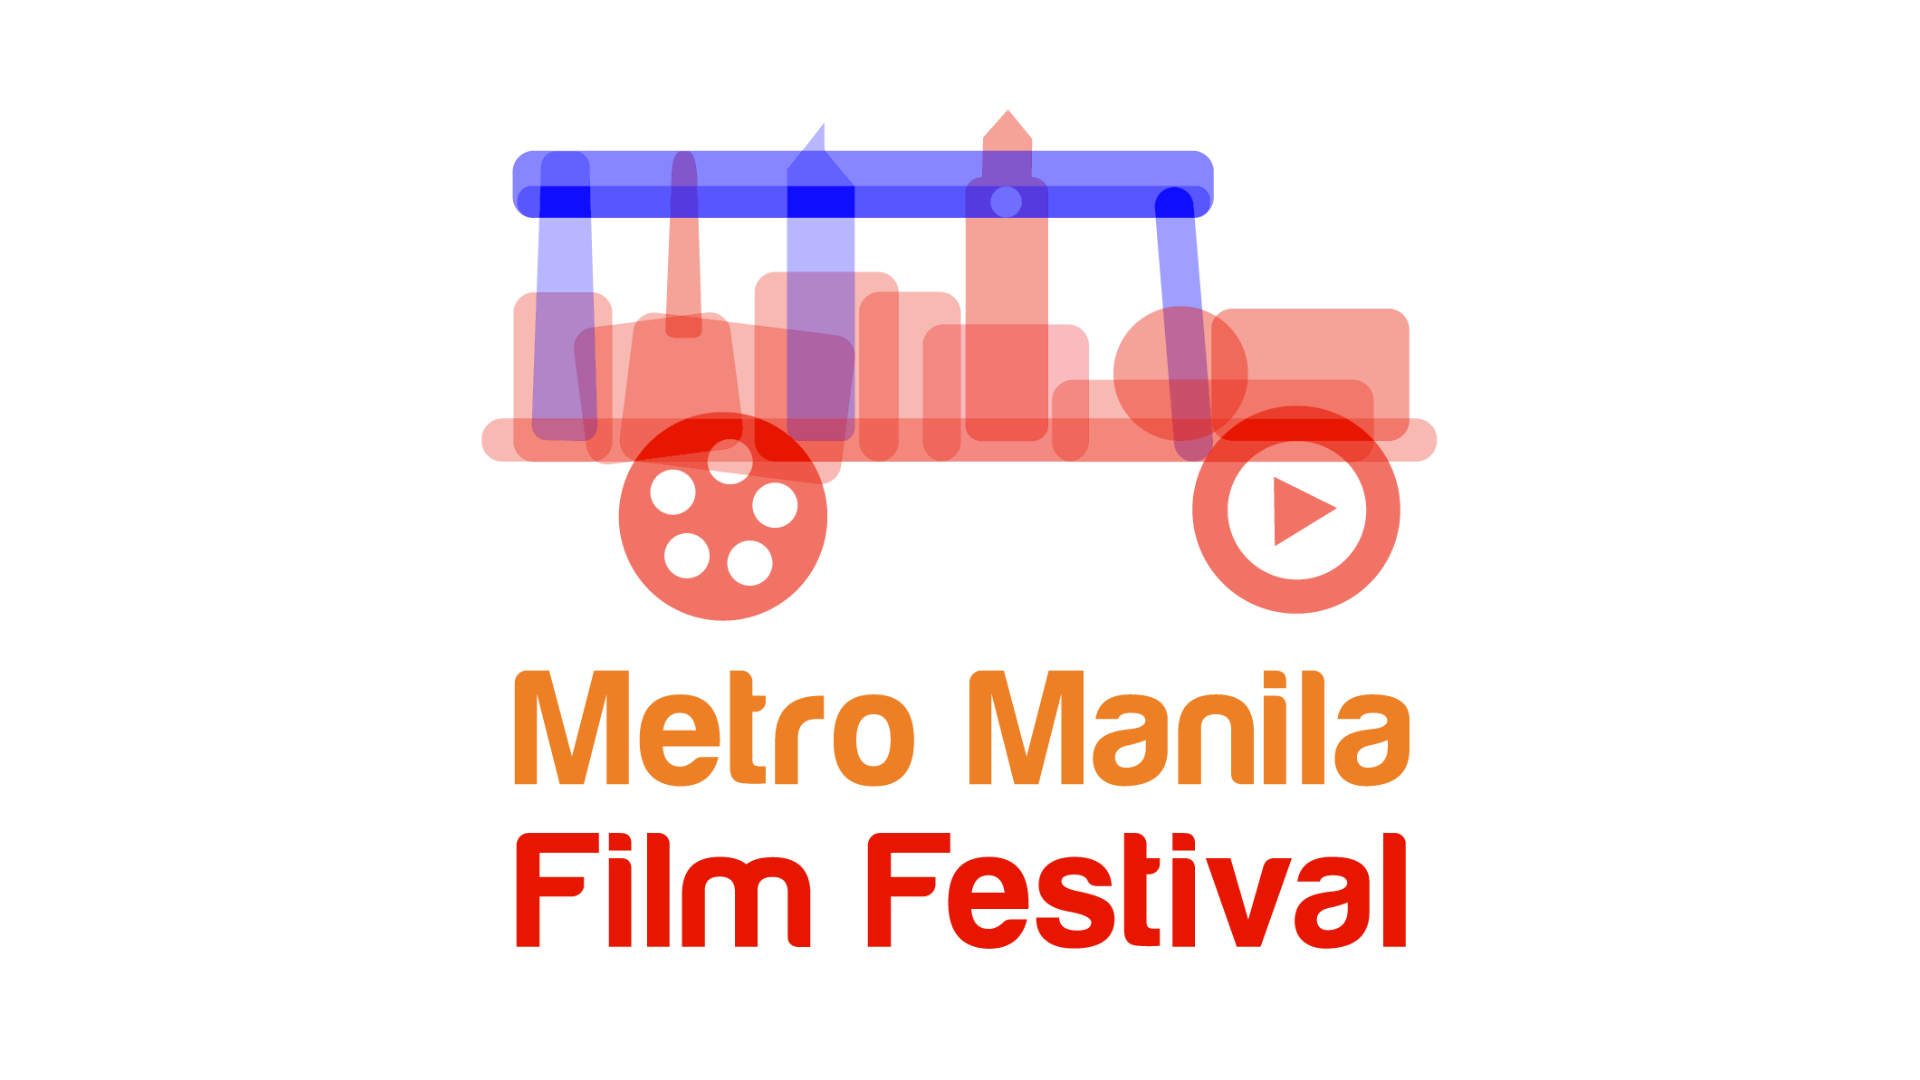 Show must go on: 10 films to compete in 2020 Metro Manila Film Fest